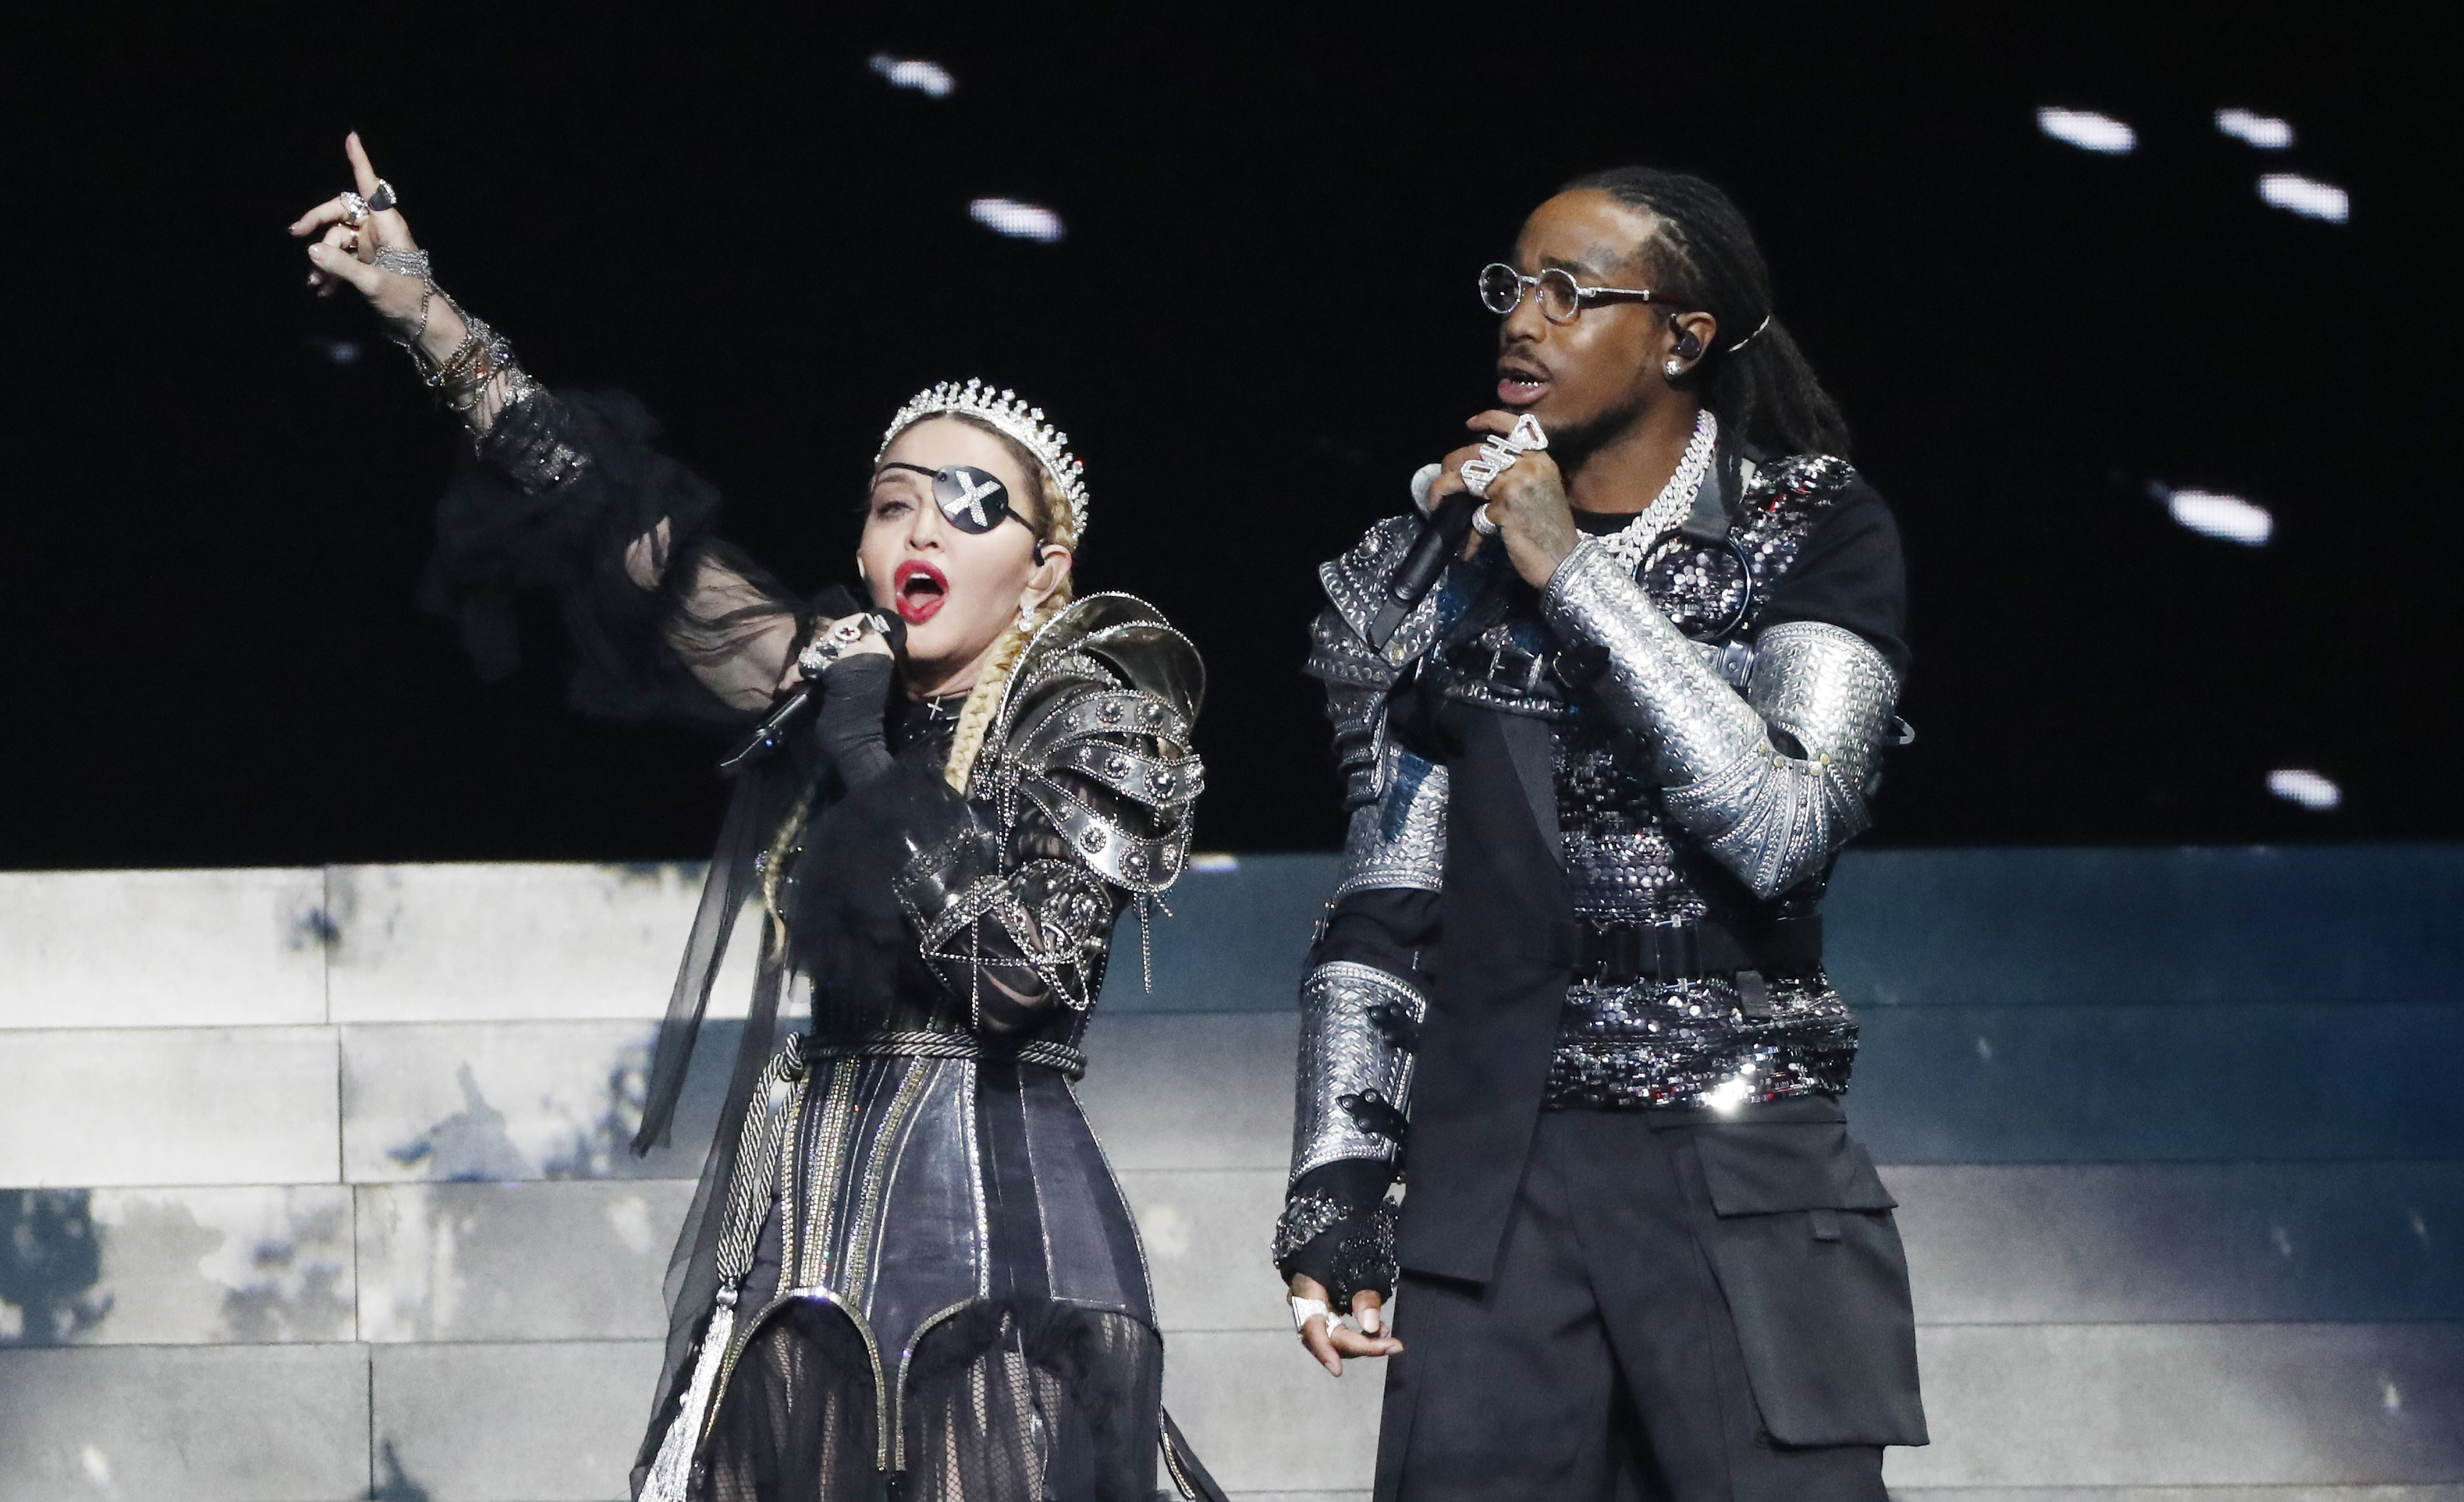 Madonna Thanks Fans For Support Following Hospitalization: 'I'm On The Road To Recovery'